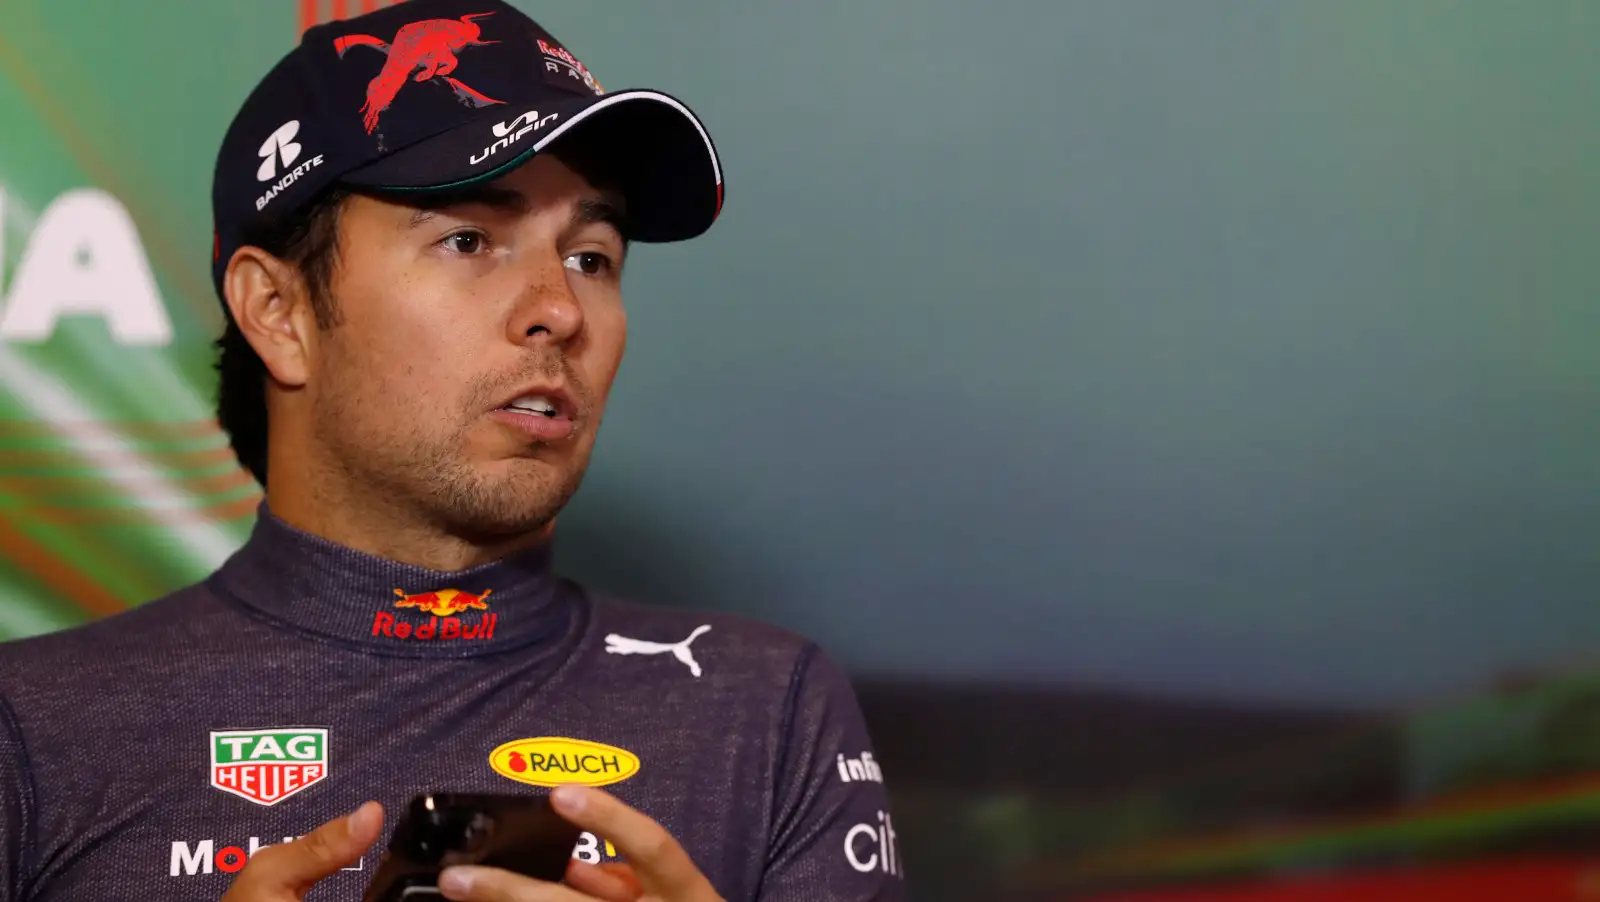 Sergio Perez holding his phone during a press conference. Imola April 2022